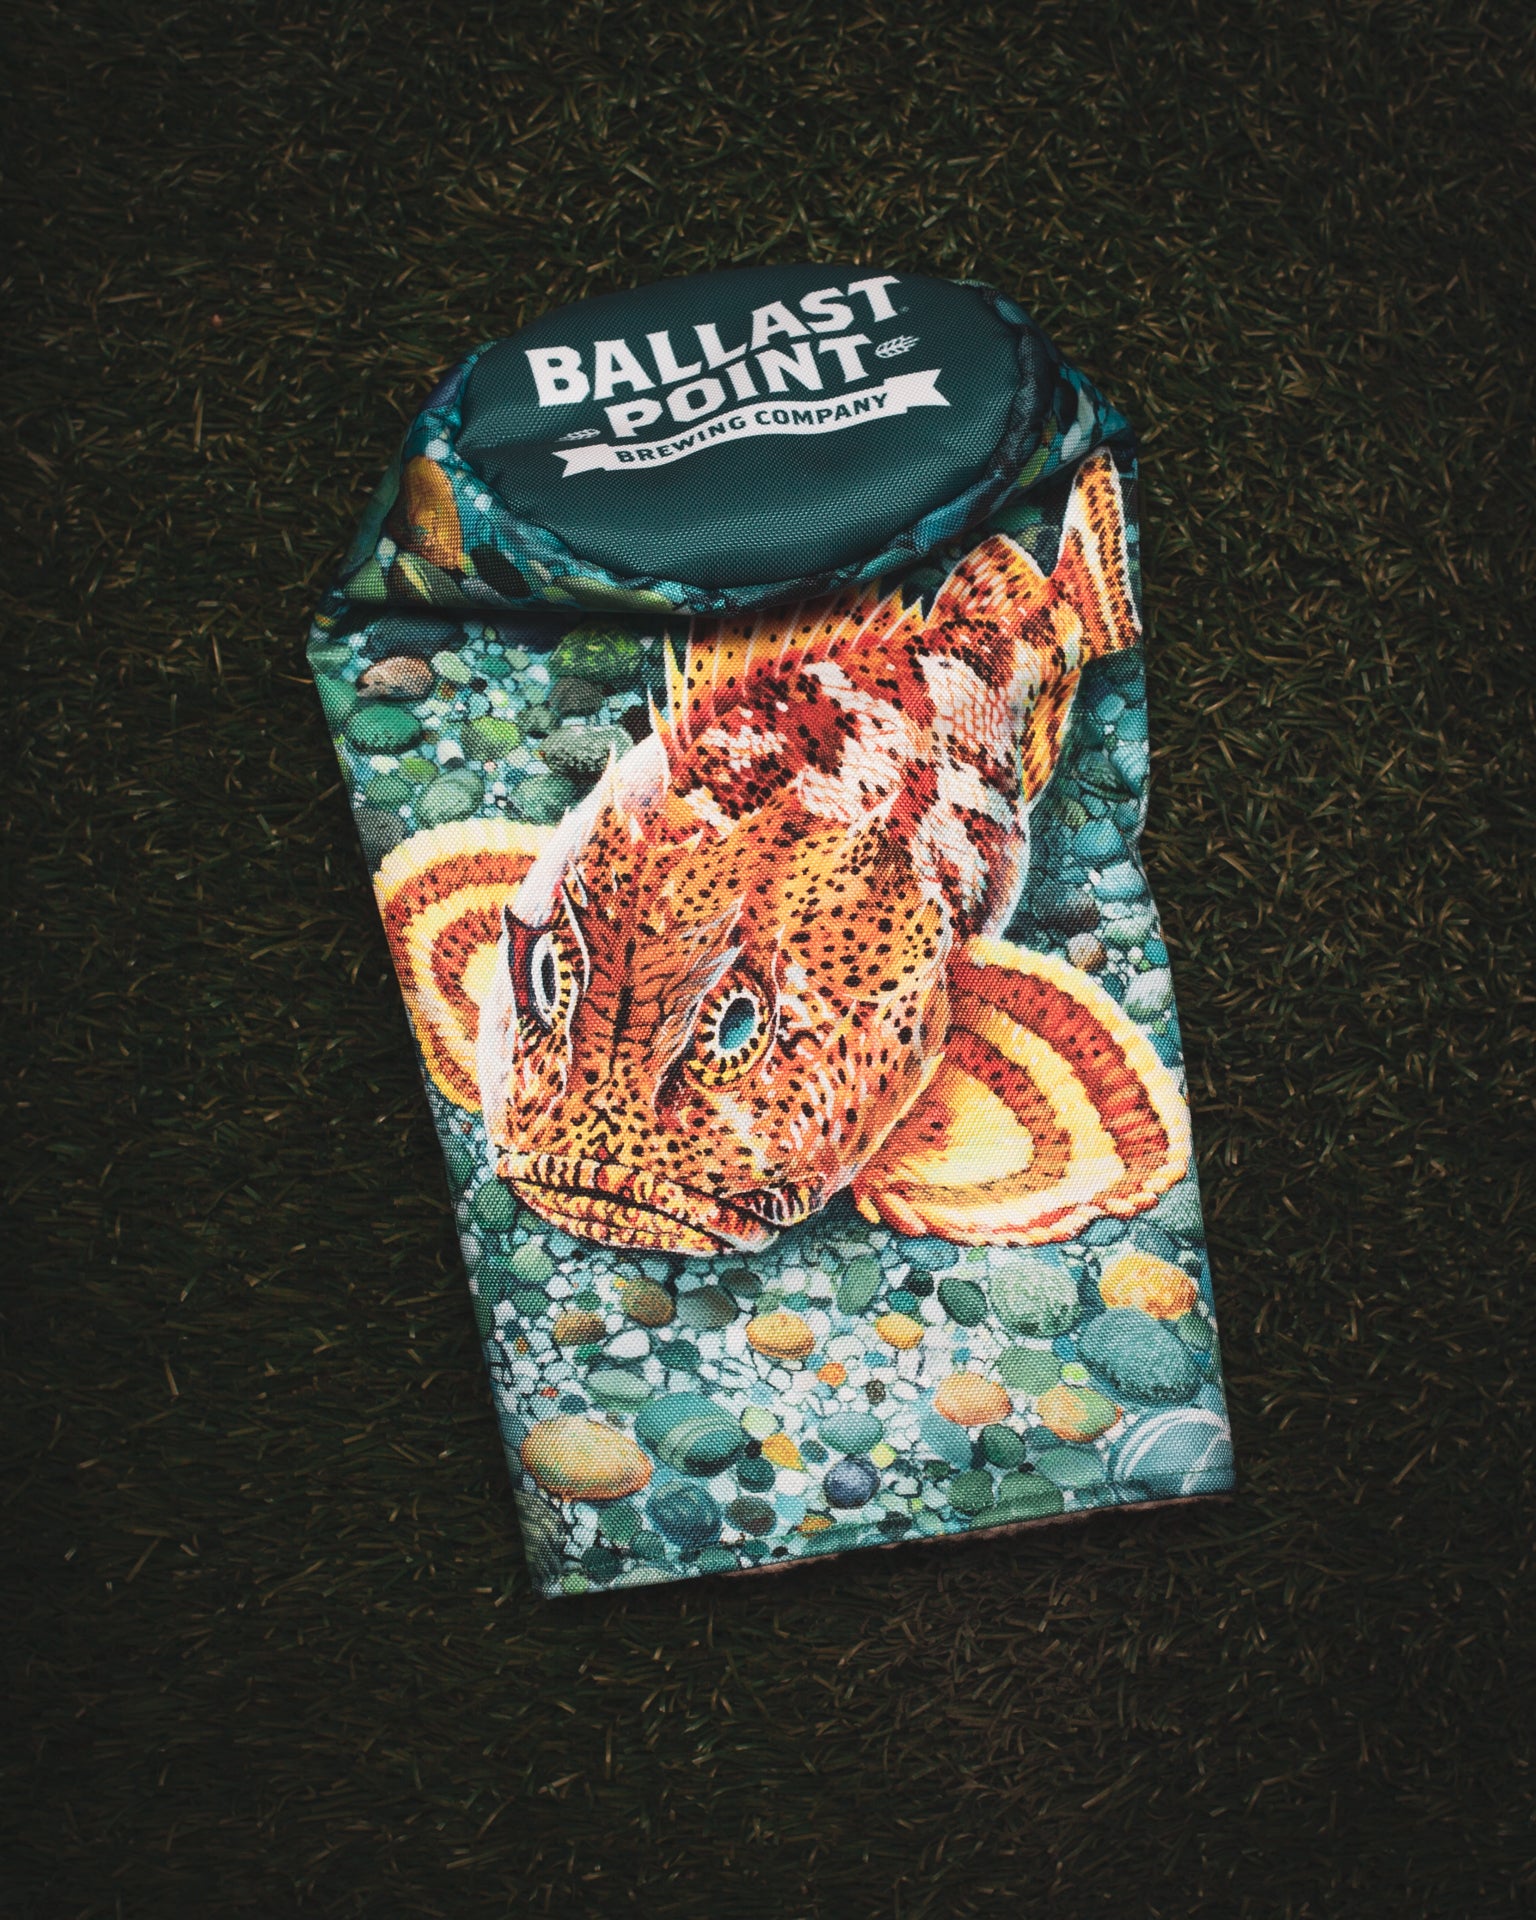 Custom golf headcover for Ballast Point Brewery featuring their Sculpin art with a teal top with their logo. 